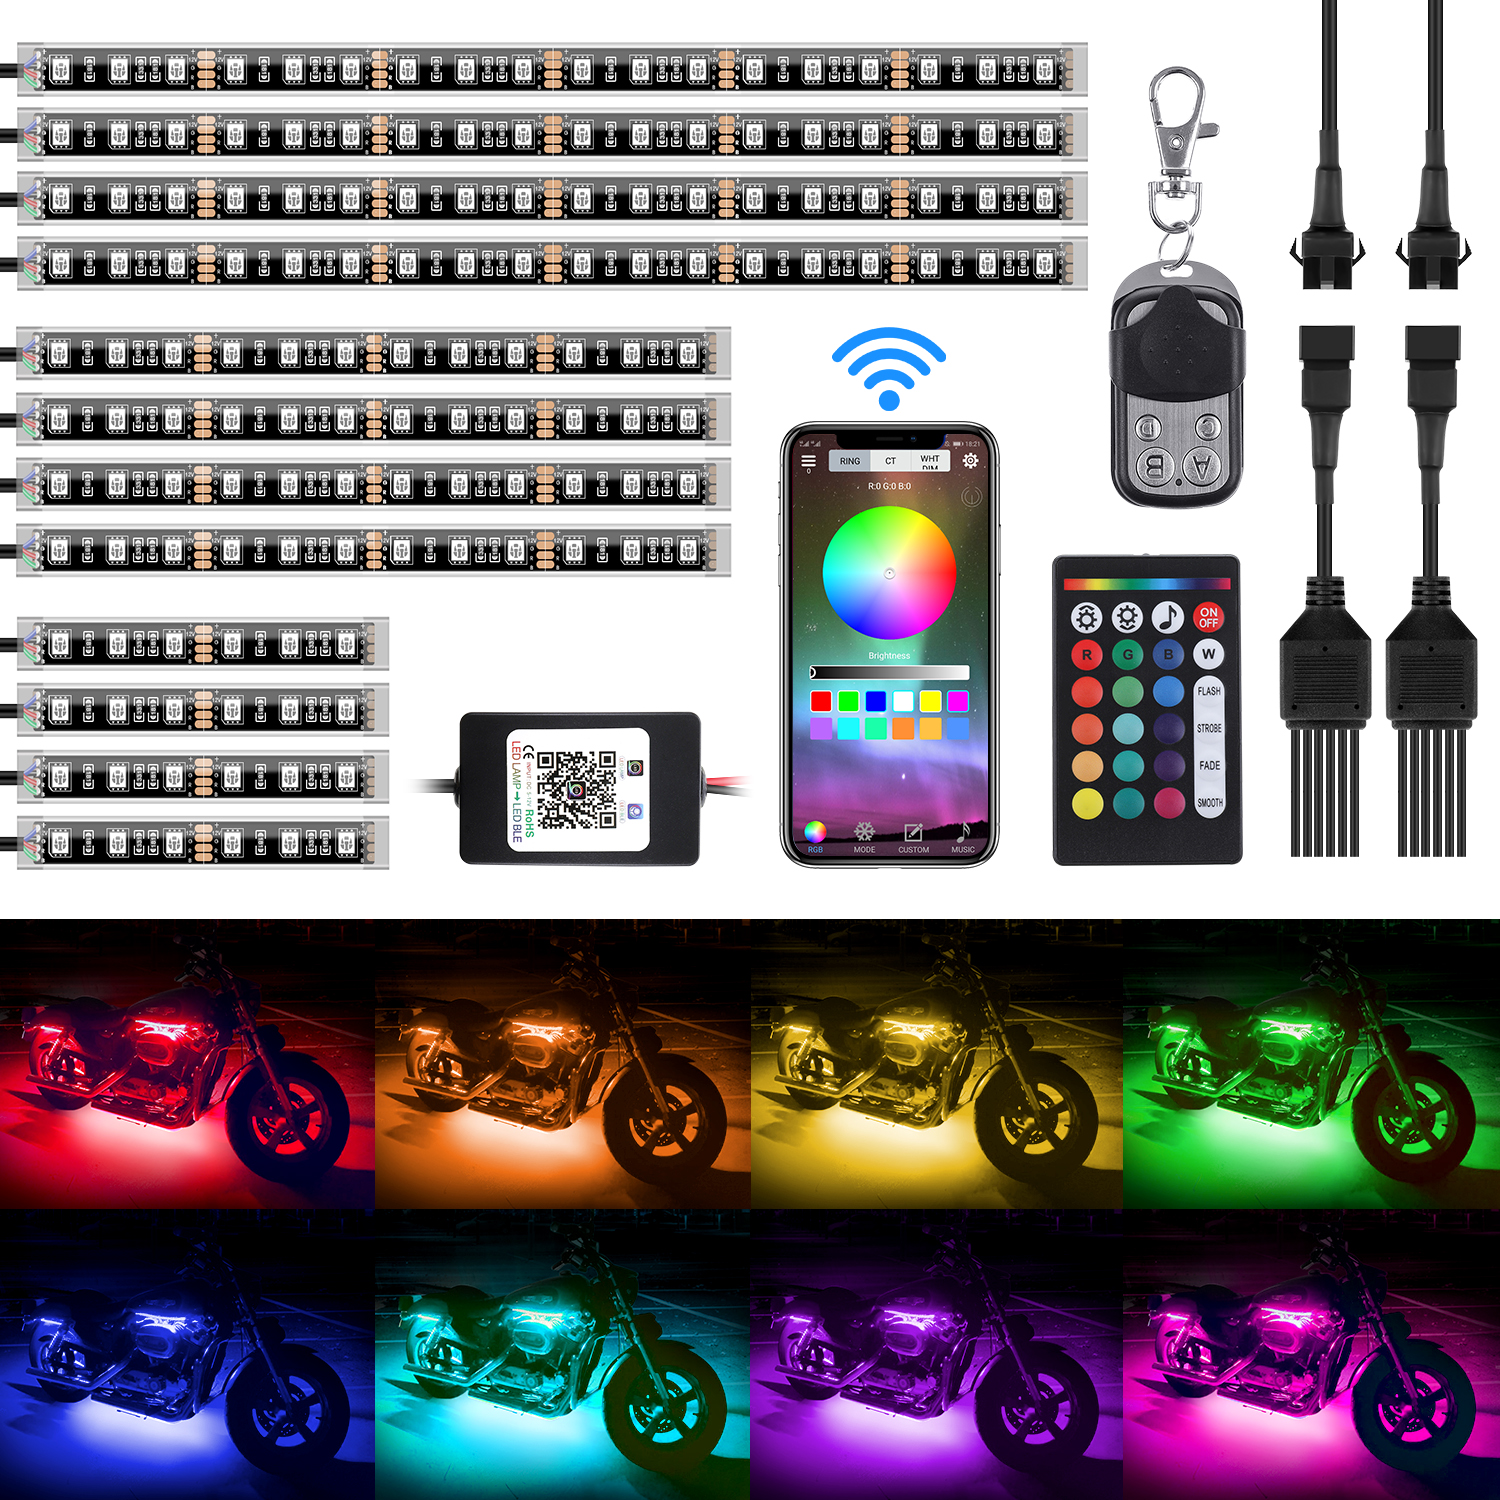 Chemini 12pcs RGB Motorcycle LED Light Kits Multi-Color Atmosphere Light Strips with 4key RF Wireless Remote Underglow Neon Ground Effect Light for Harley 